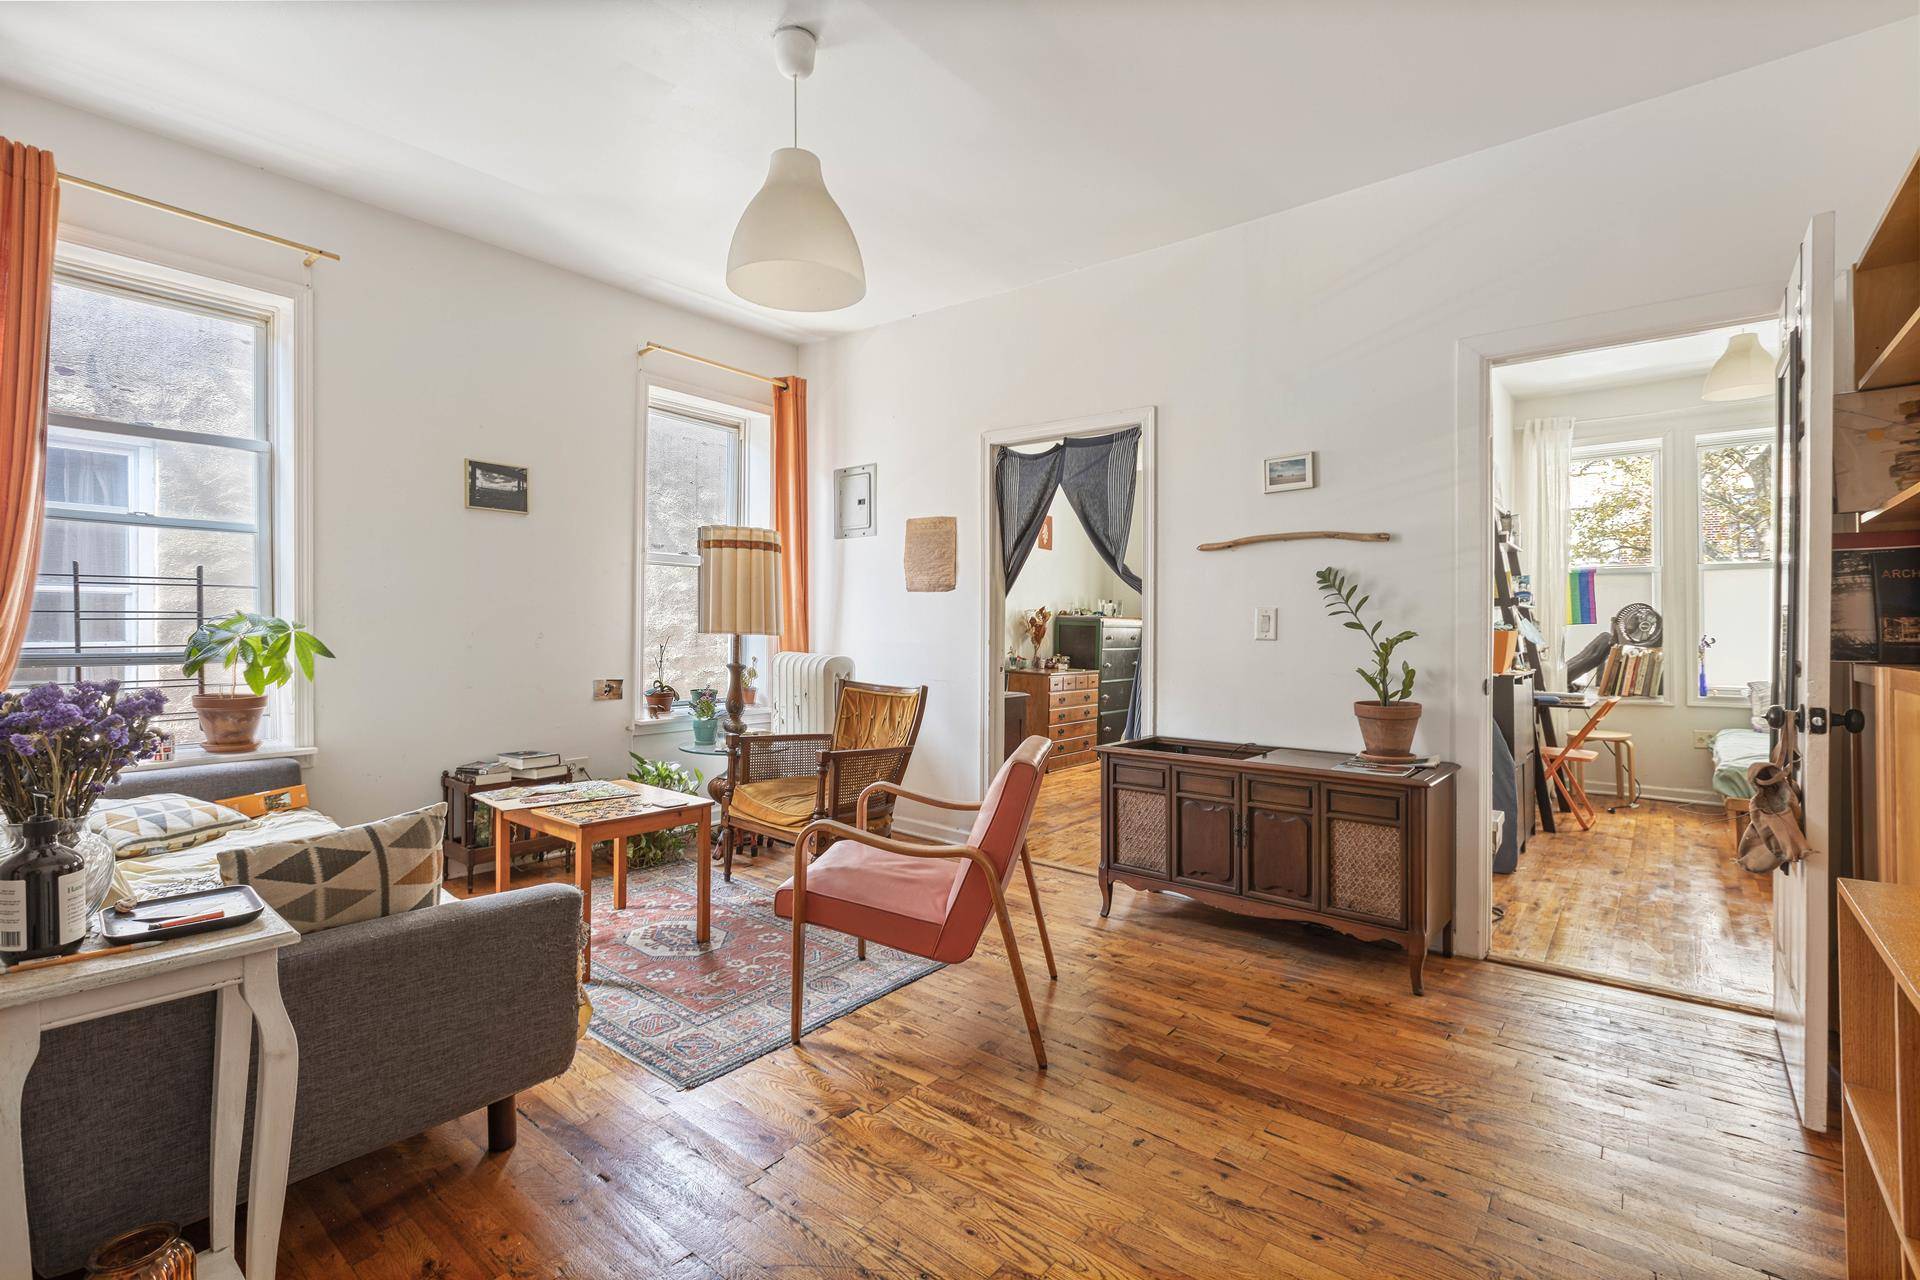 Welcome to 1602 Prospect Place in Crown Heights, an Investors Dream.